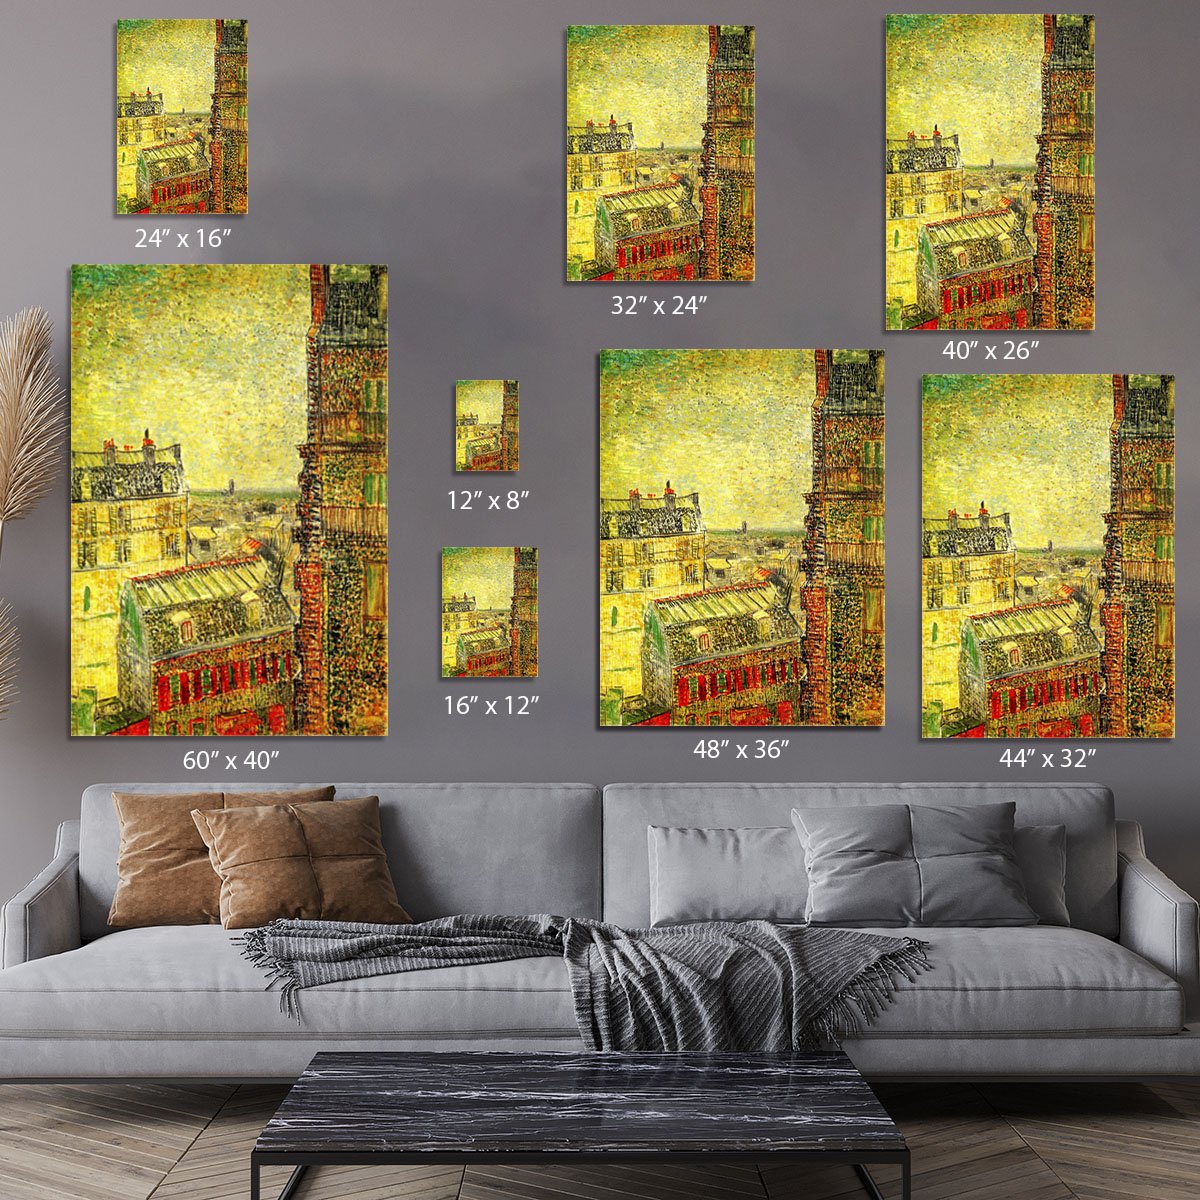 View of Paris from Vincent s Room in the Rue Lepic by Van Gogh Canvas Print or Poster